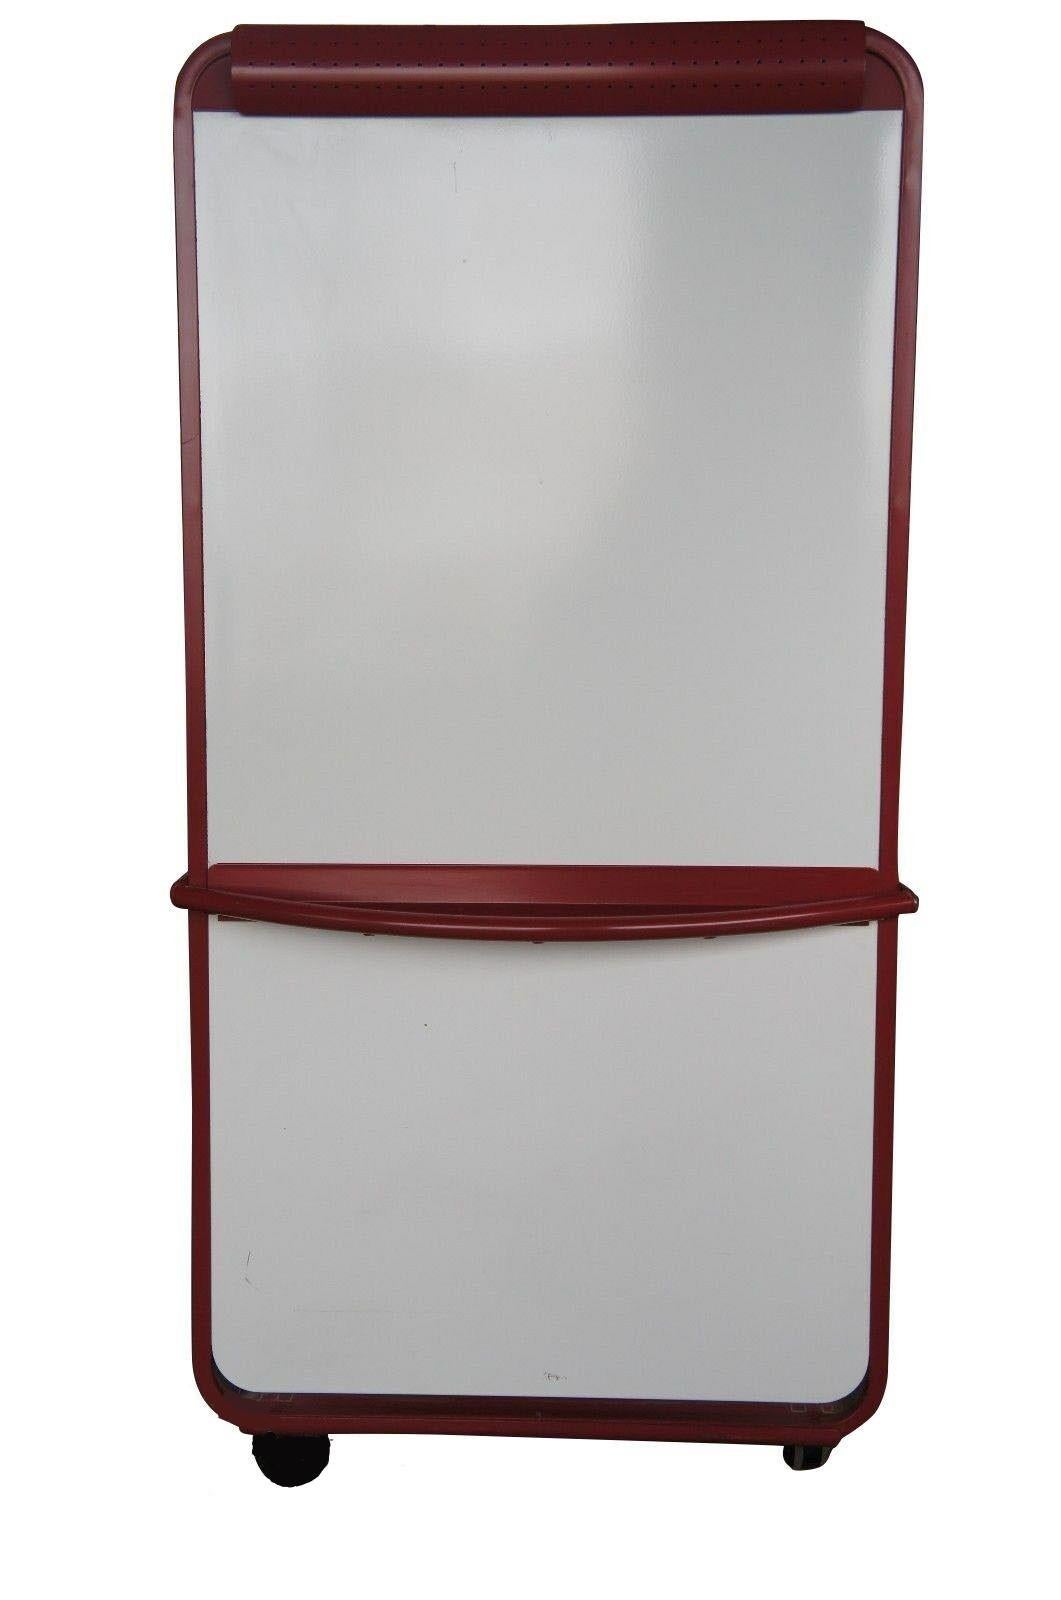 Vintage life-size bretford presentation easel dry erase magnetic porcelain whiteboard

Presentation Environments Series, Model PME7236

Board surfaces are porcelain and magnetic. 
Steel frame, compression bars for clamping charts or pads and